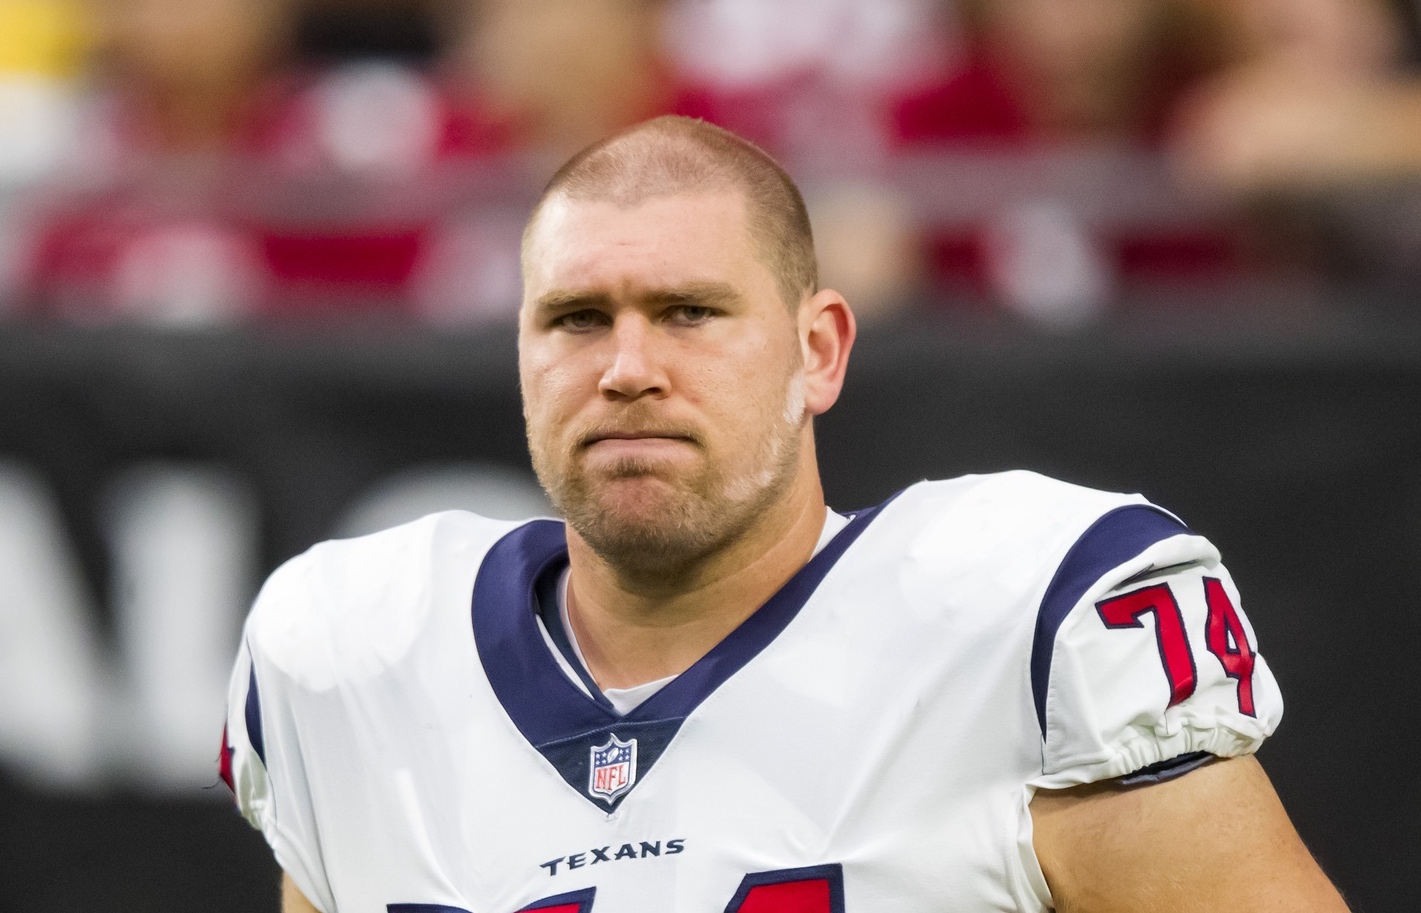 Texans Weren't Happy After Bengals Acquired Max Scharping From Them on Waivers